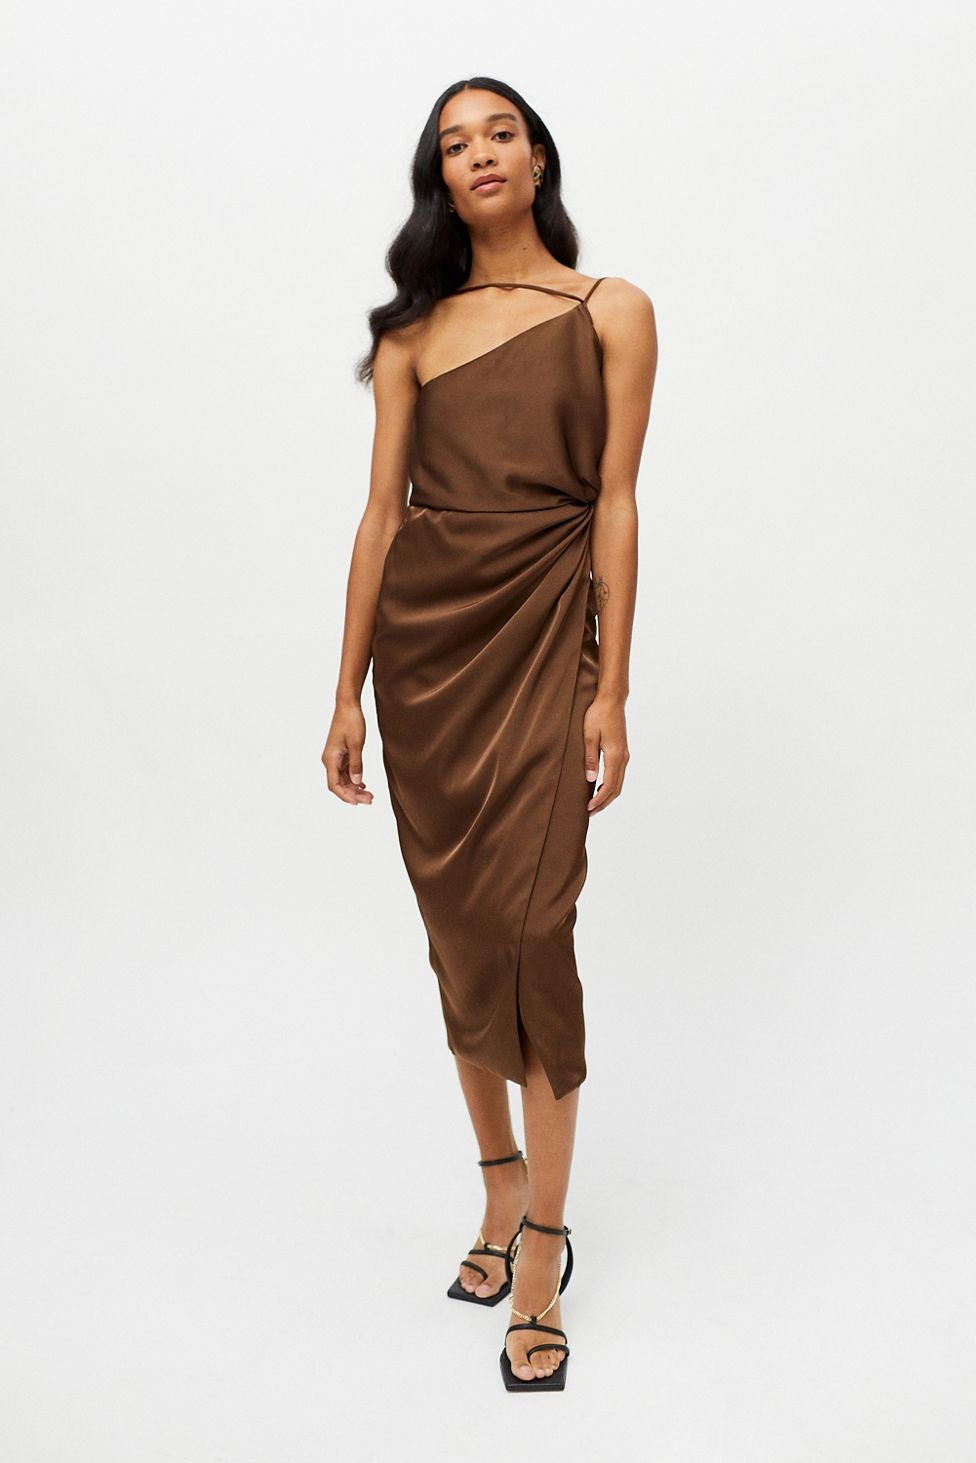 model wearing the brown dress, which has asymmetrical straps across the neckline